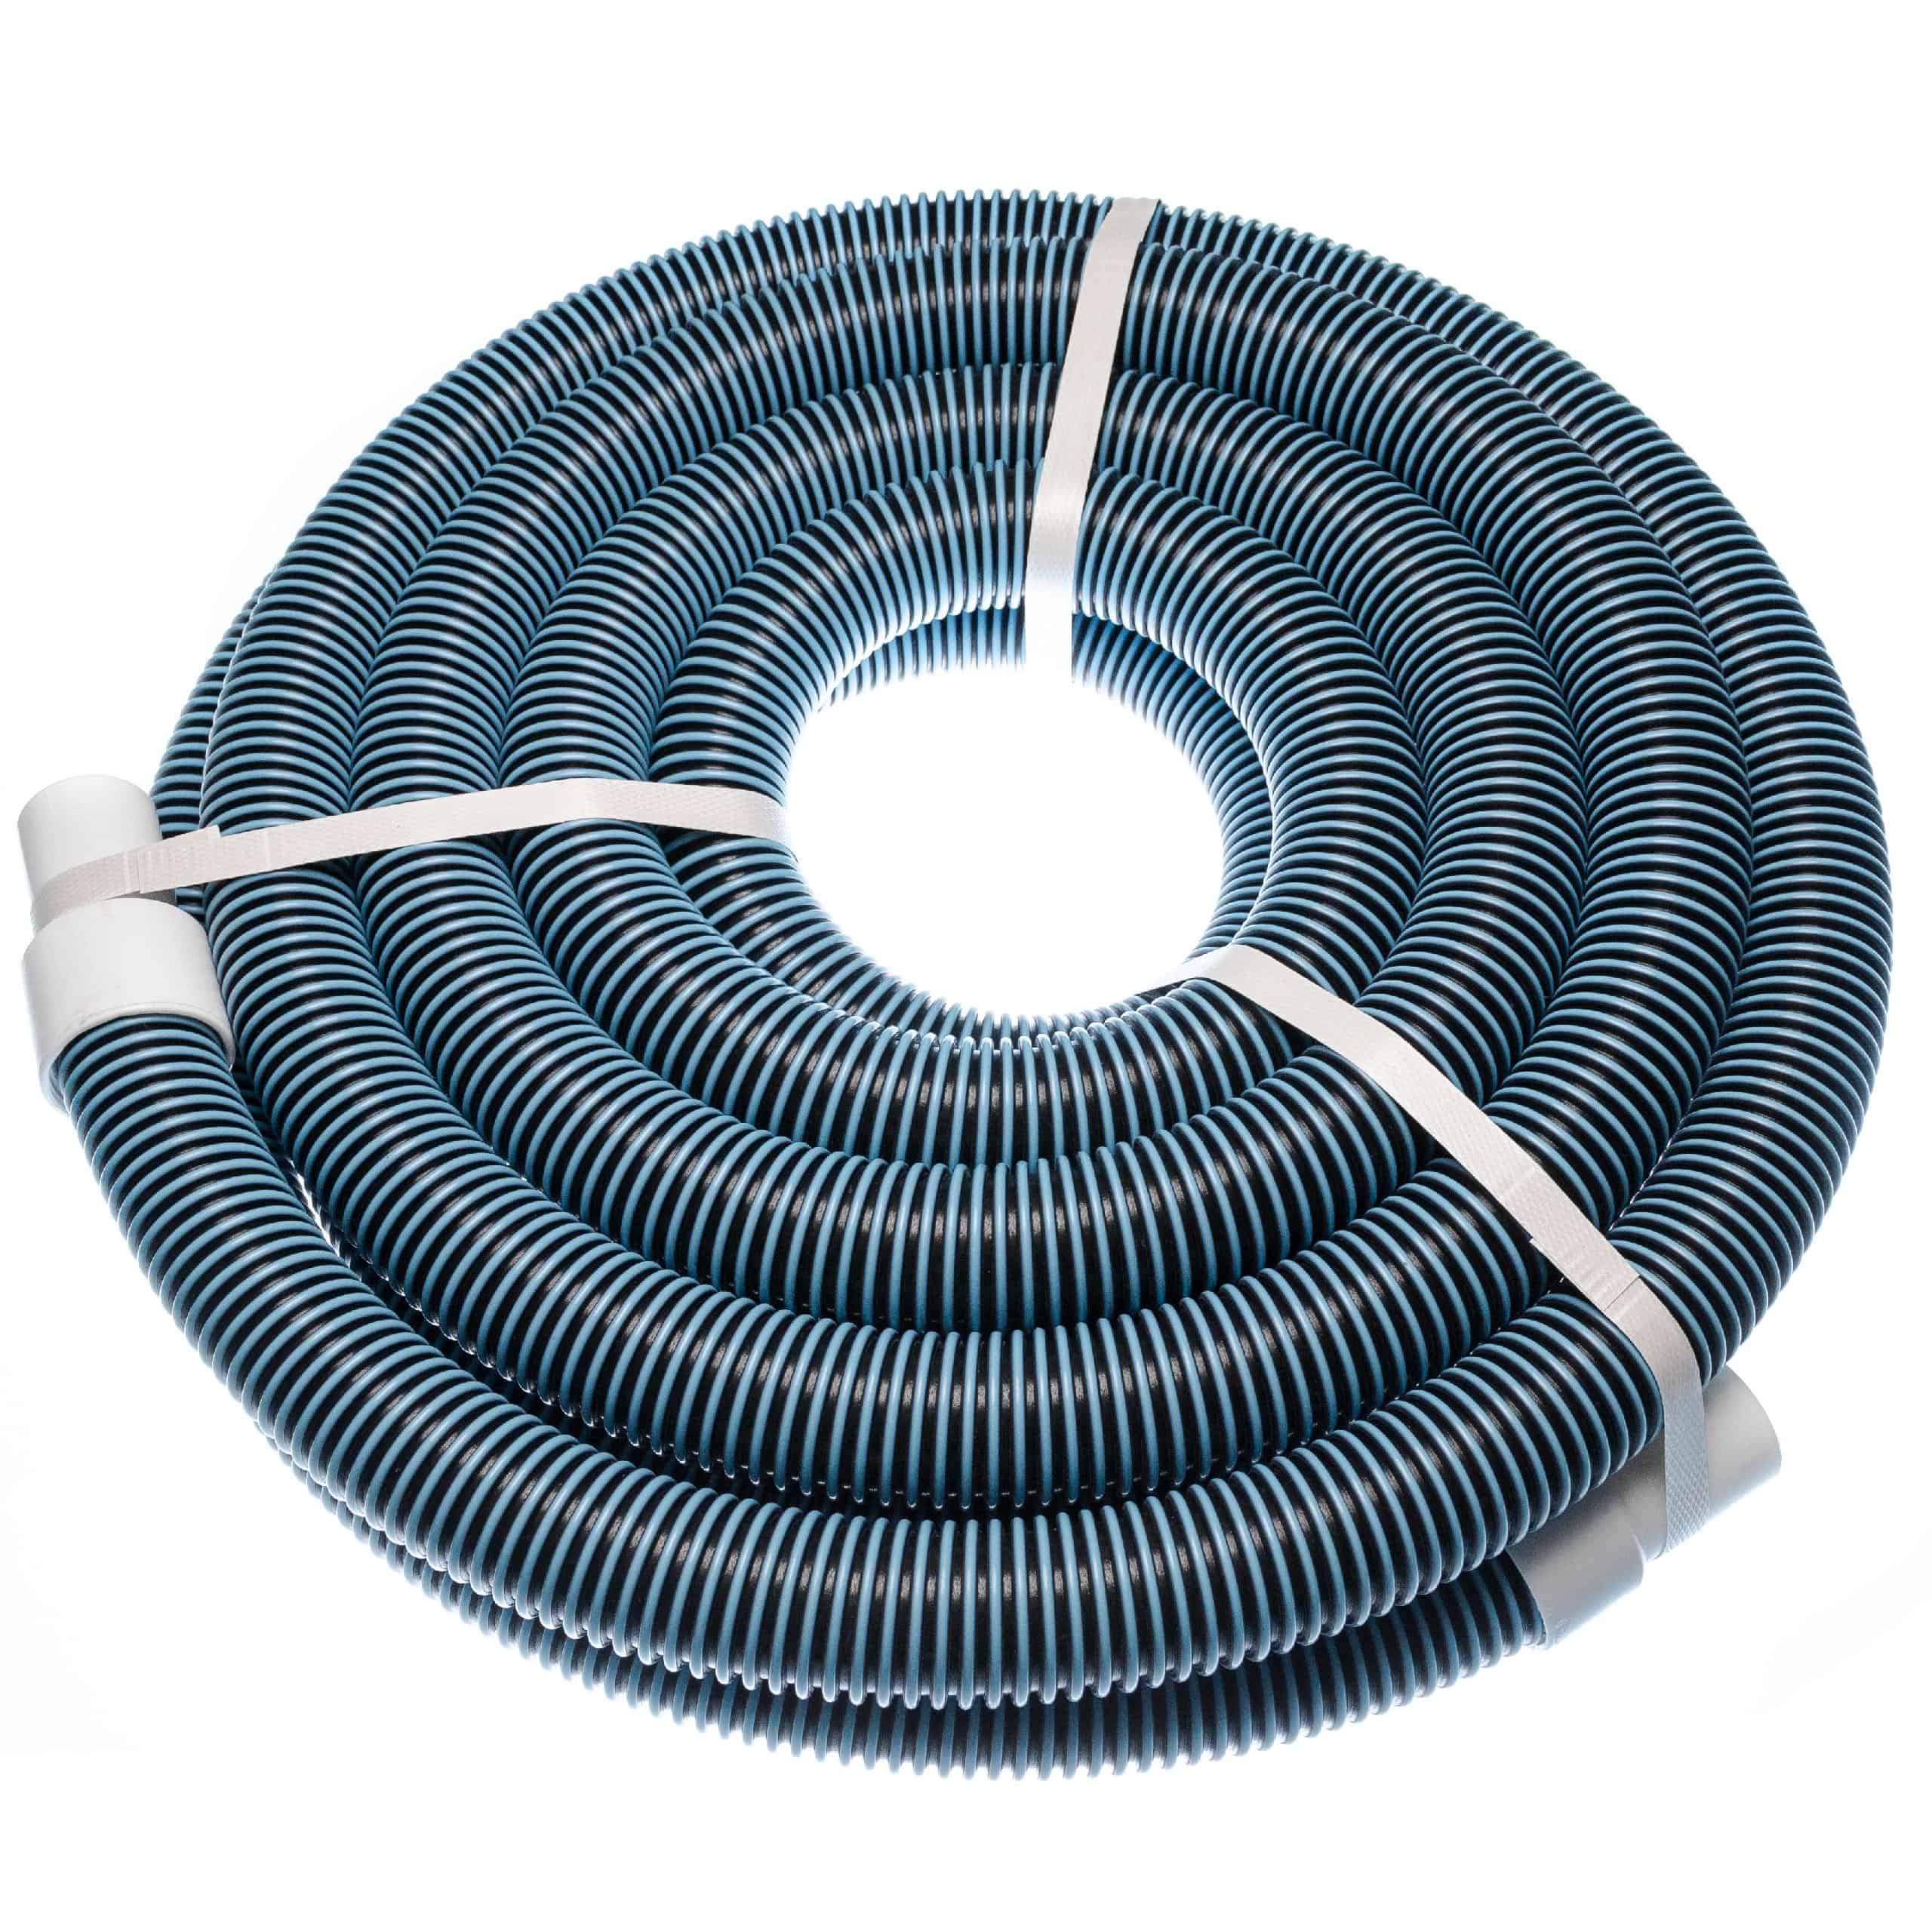 Hose Pipe suitable for Skimmer, Filter, Pool Cleaner Robot - connector 32 mm, 7.6 m